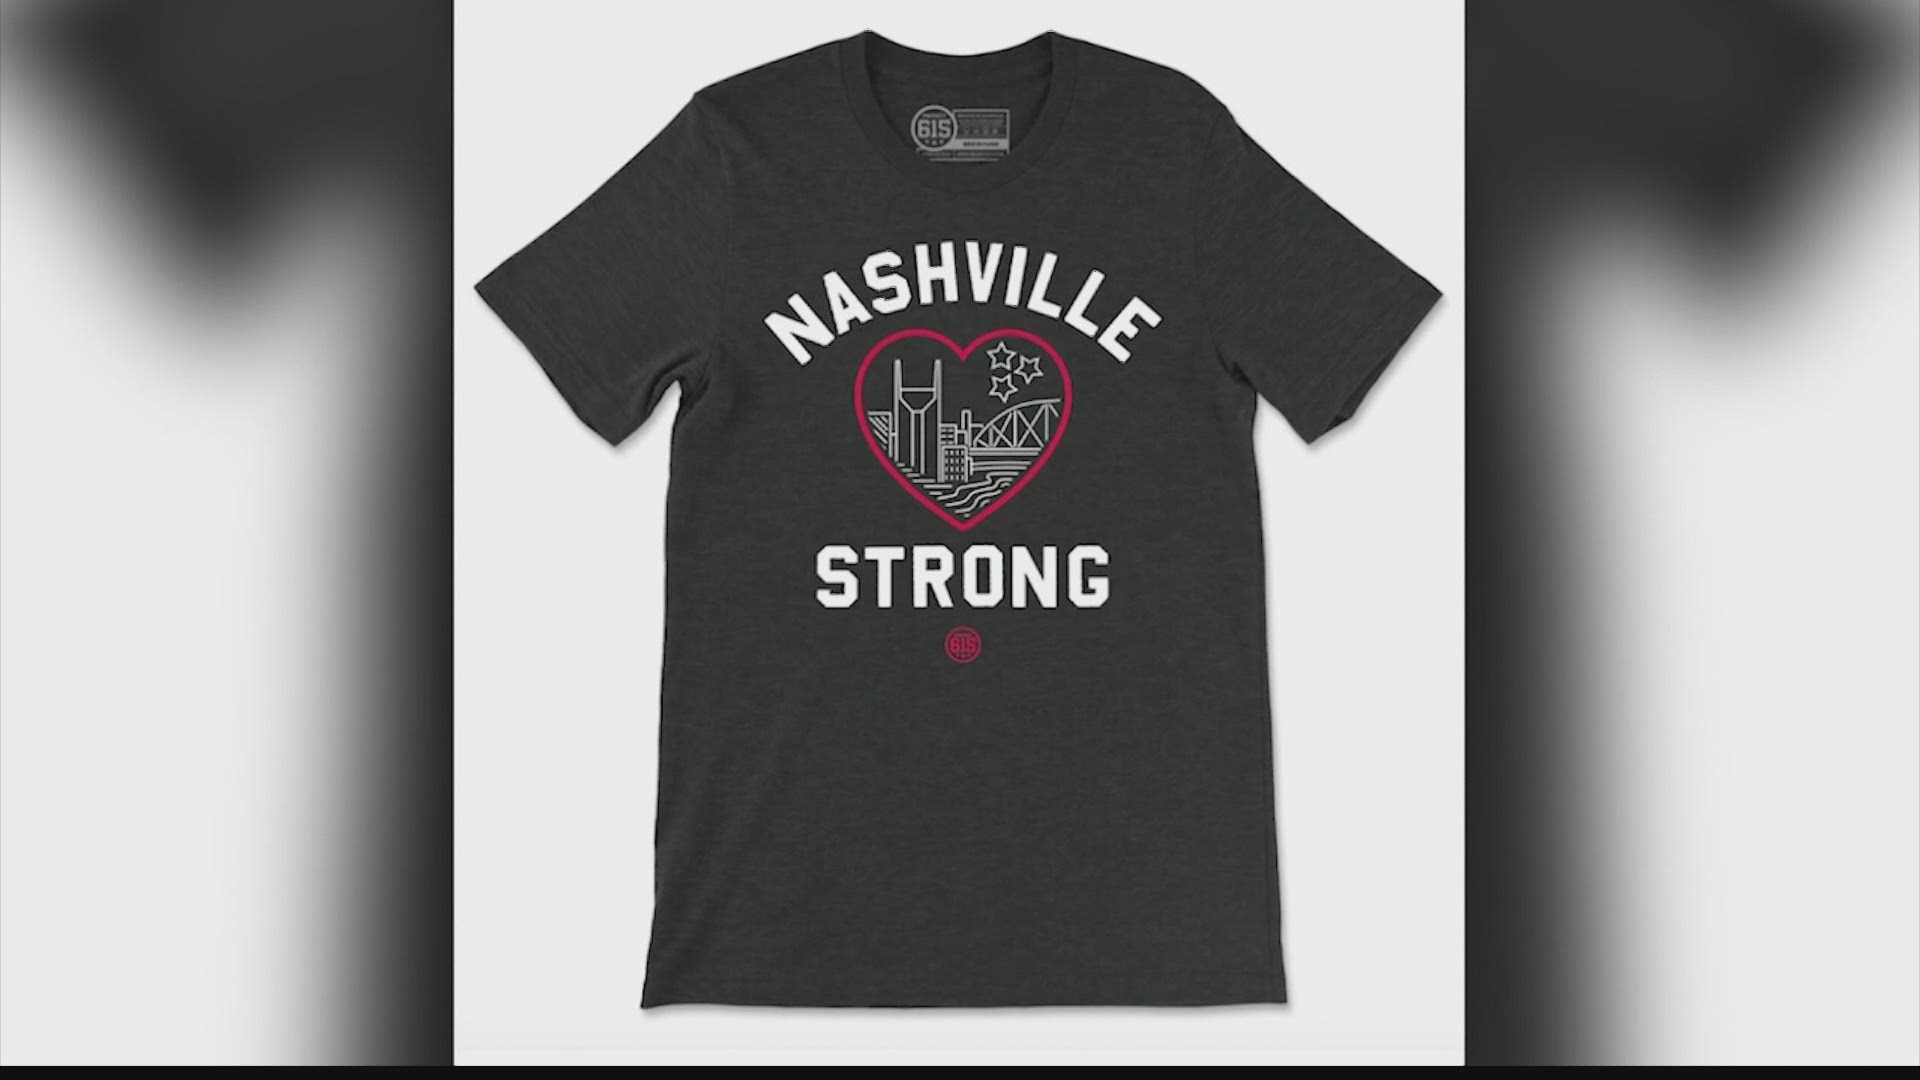 100% of the profits from the sales of the "Nashville Strong" shirts will be donated to small businesses and the people affected by the incident.